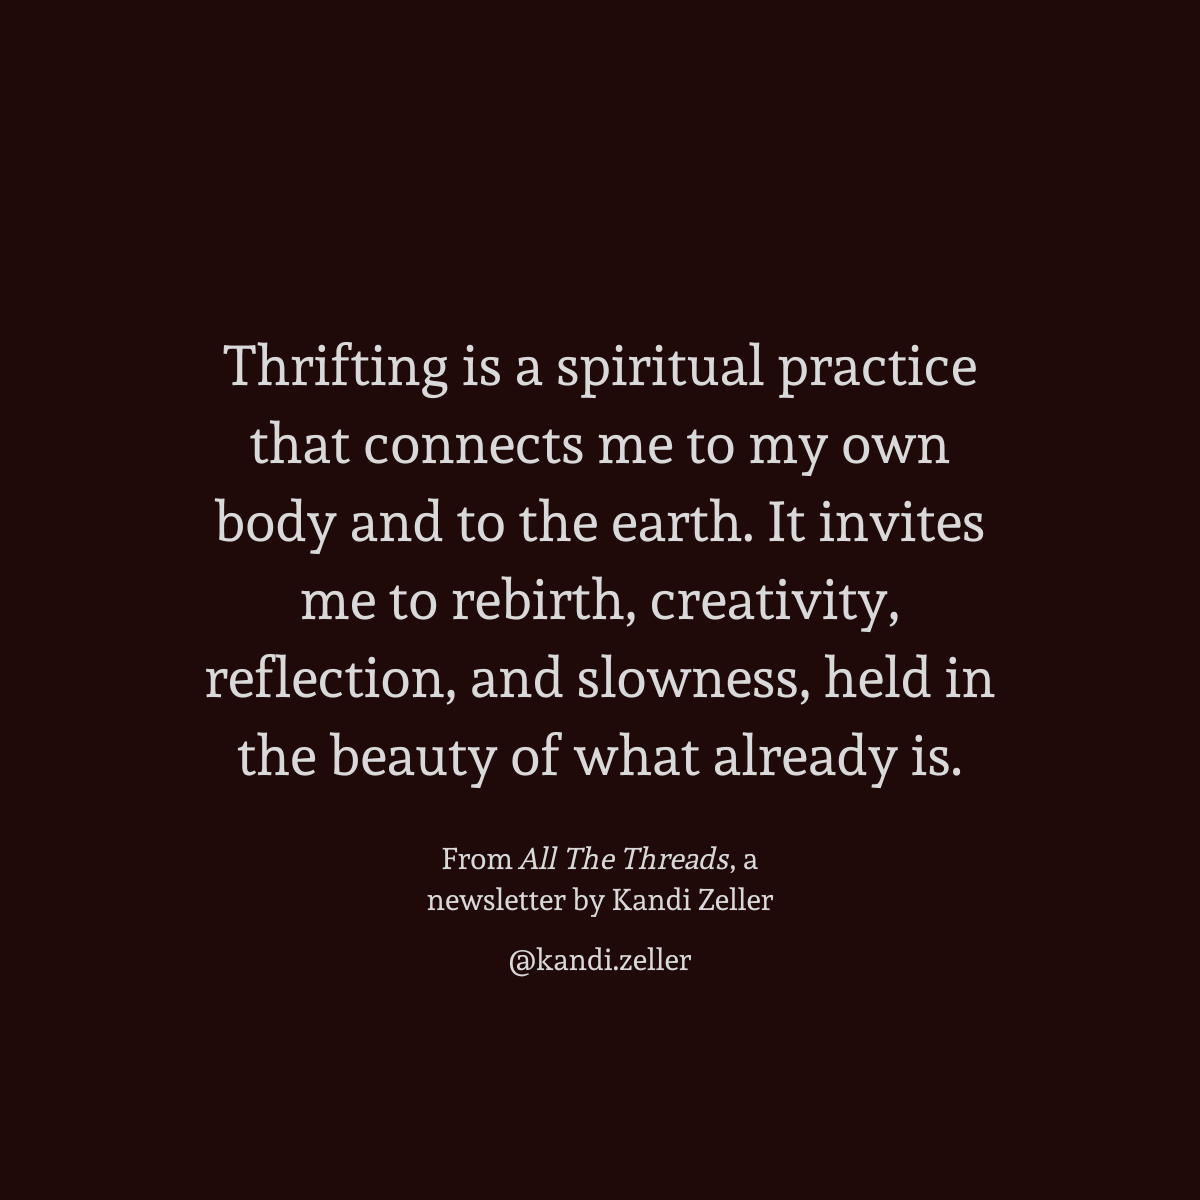 A dark background with white lettering that reads, “Thrifting is a spiritual practice that connects me to my own body and to the earth. It invites me to rebirth, creativity, reflection, and slowness, held in the beauty of what already is. From All The Threads, a newsletter by Kandi Zeller, @Kandi.Zeller”